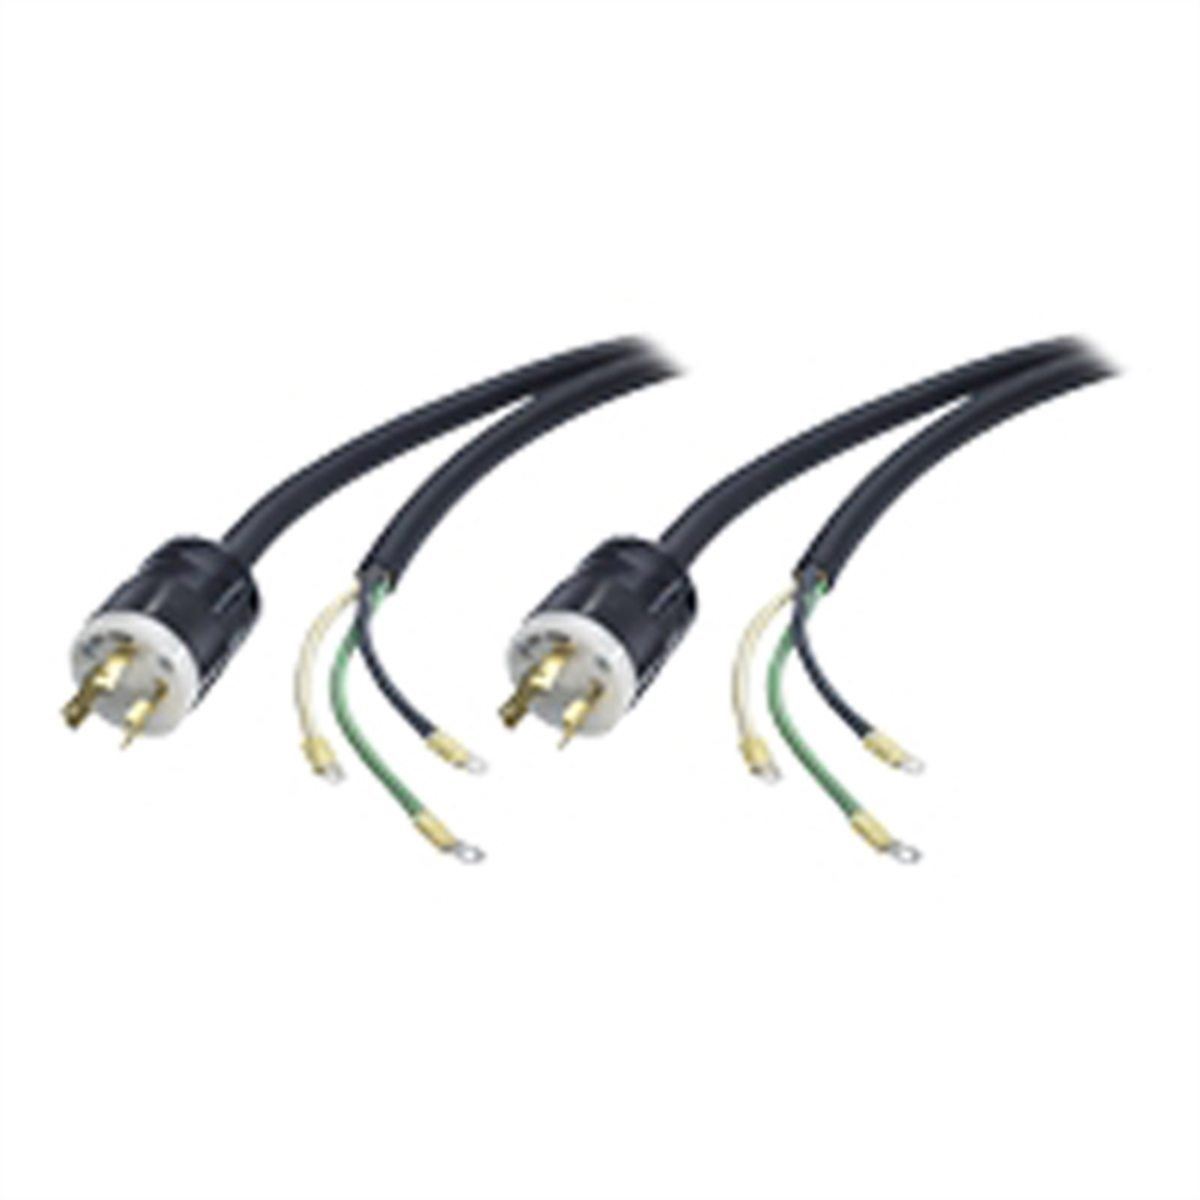 Cable for Digital Pressure & Temp Analyzer - 12 Ft